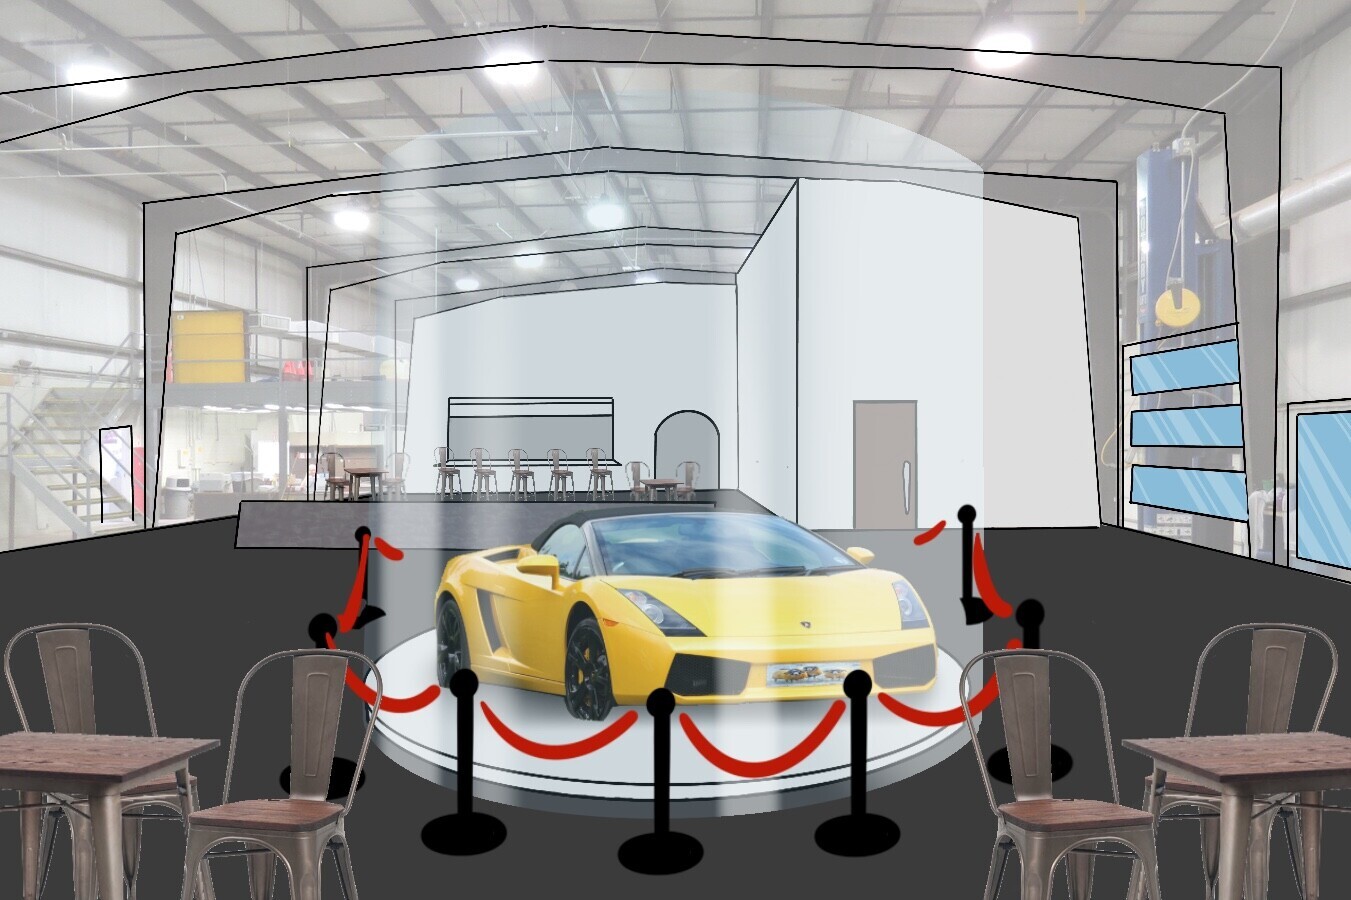 The centerpiece of the restaurant will be a luxury car, as ad space for a dealership, spinning on a display platform, encased in protective glass and sleek velvet rope. ... *Read more in the description*